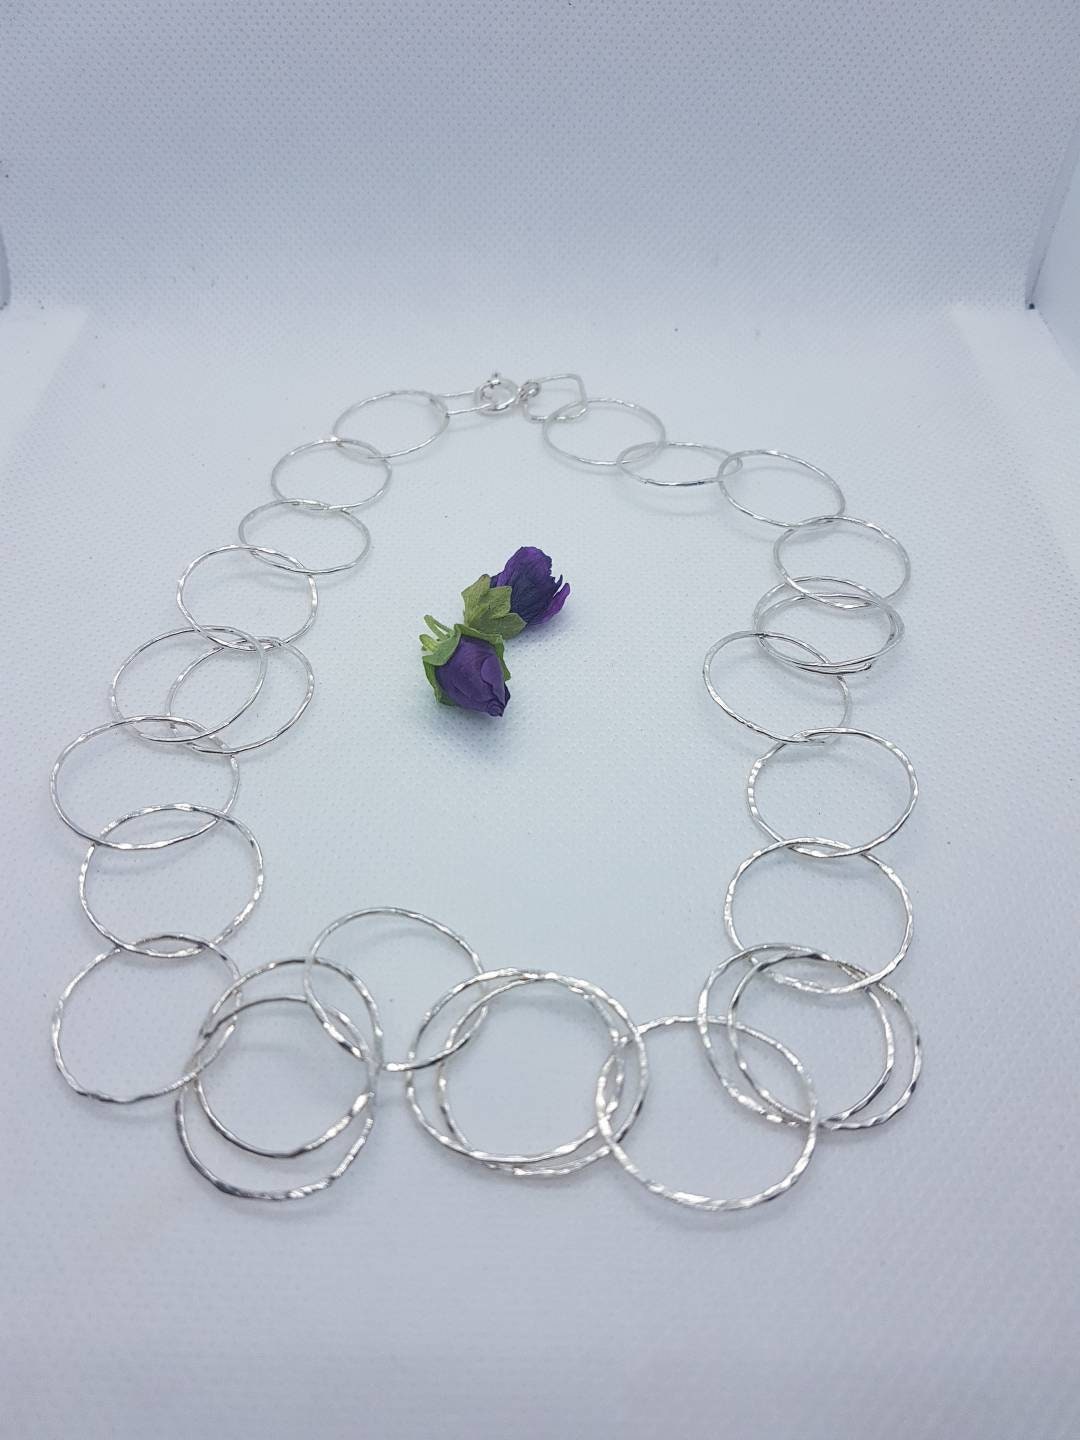 Silver Hammered Link Necklace, Large Handforged Silver Links, Handmade in Uk, Recycled Silver, Postal Gifts